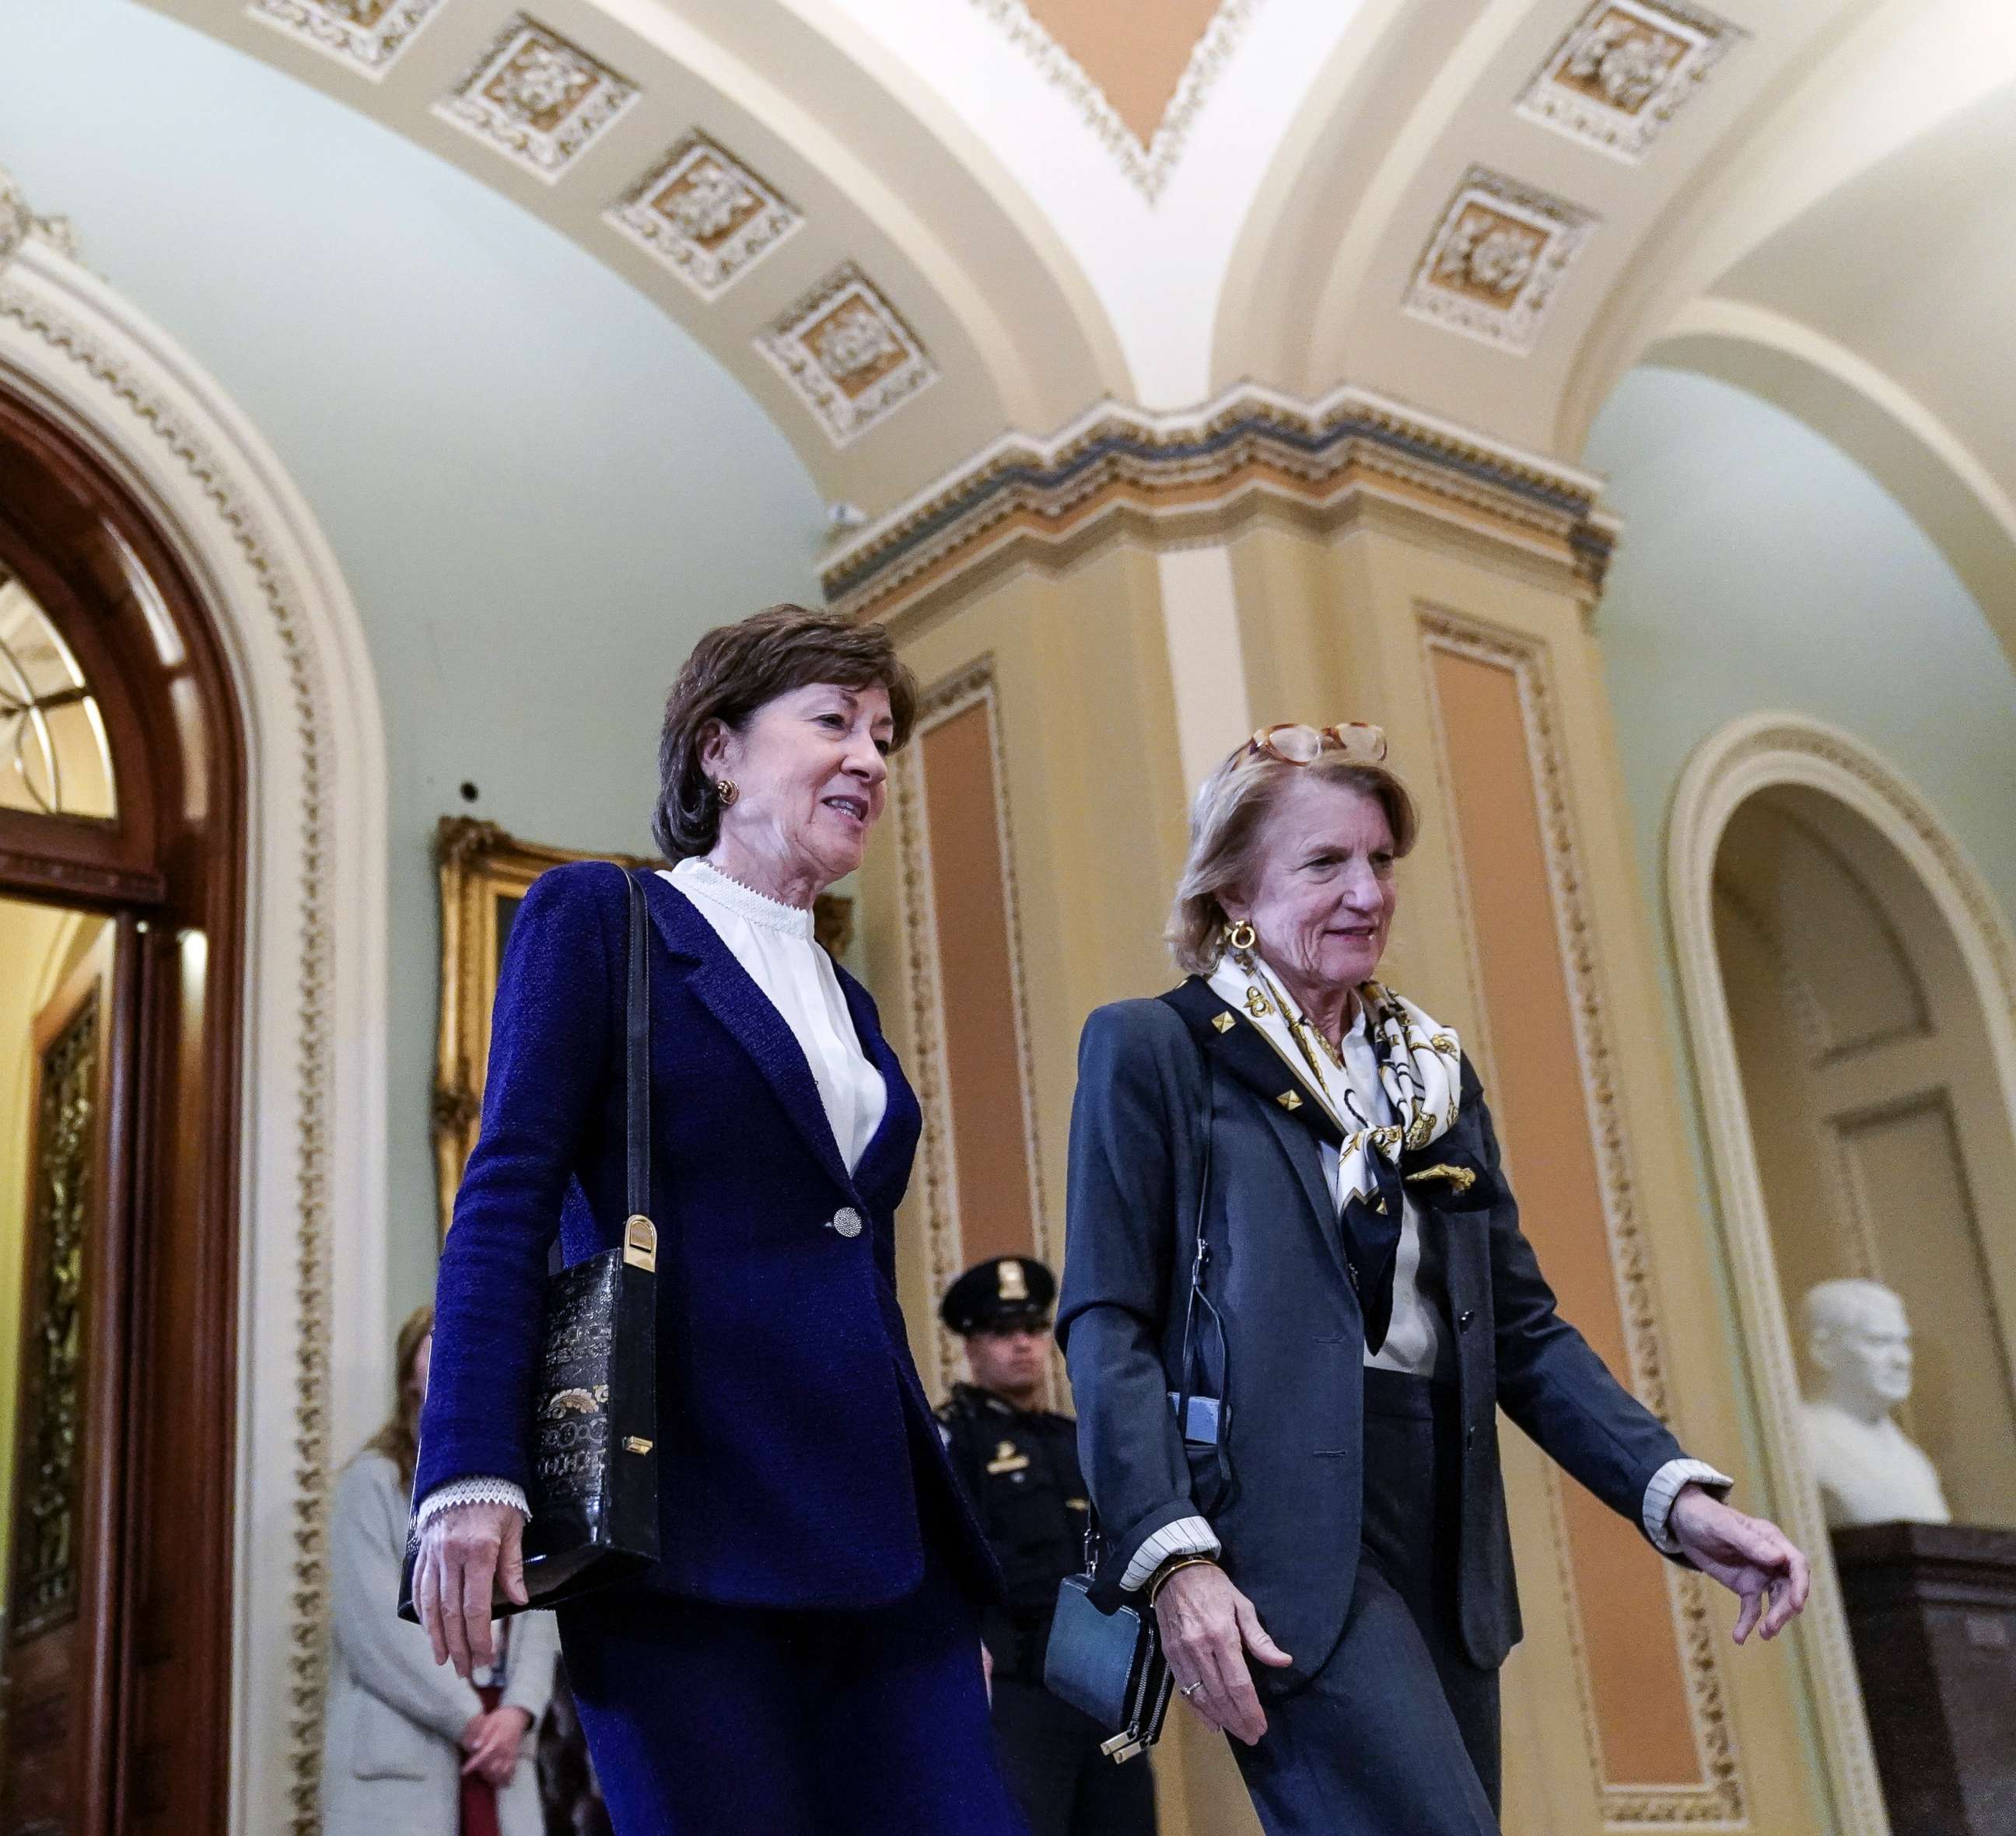 PHOTO: Sen. Susan Collins and Sen. Shelley Moore Capito leave the Senate chamber at the Capitol on Jan. 31, 2020 in Washington, D.C.